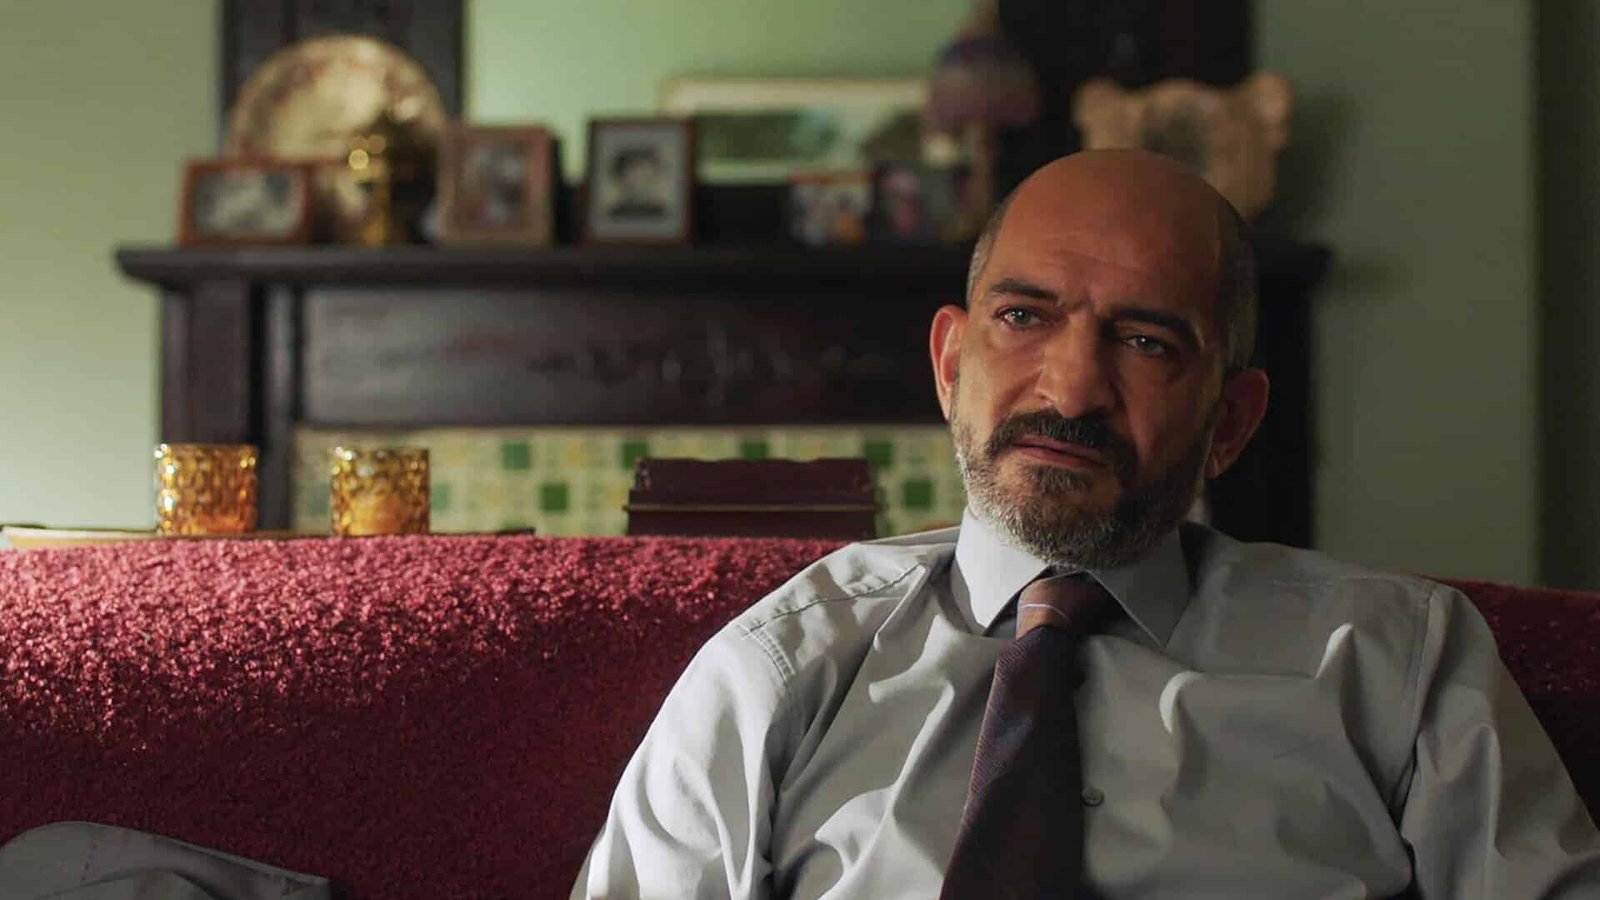 Ramy Cast - Amr Waked as Farouk Hassan